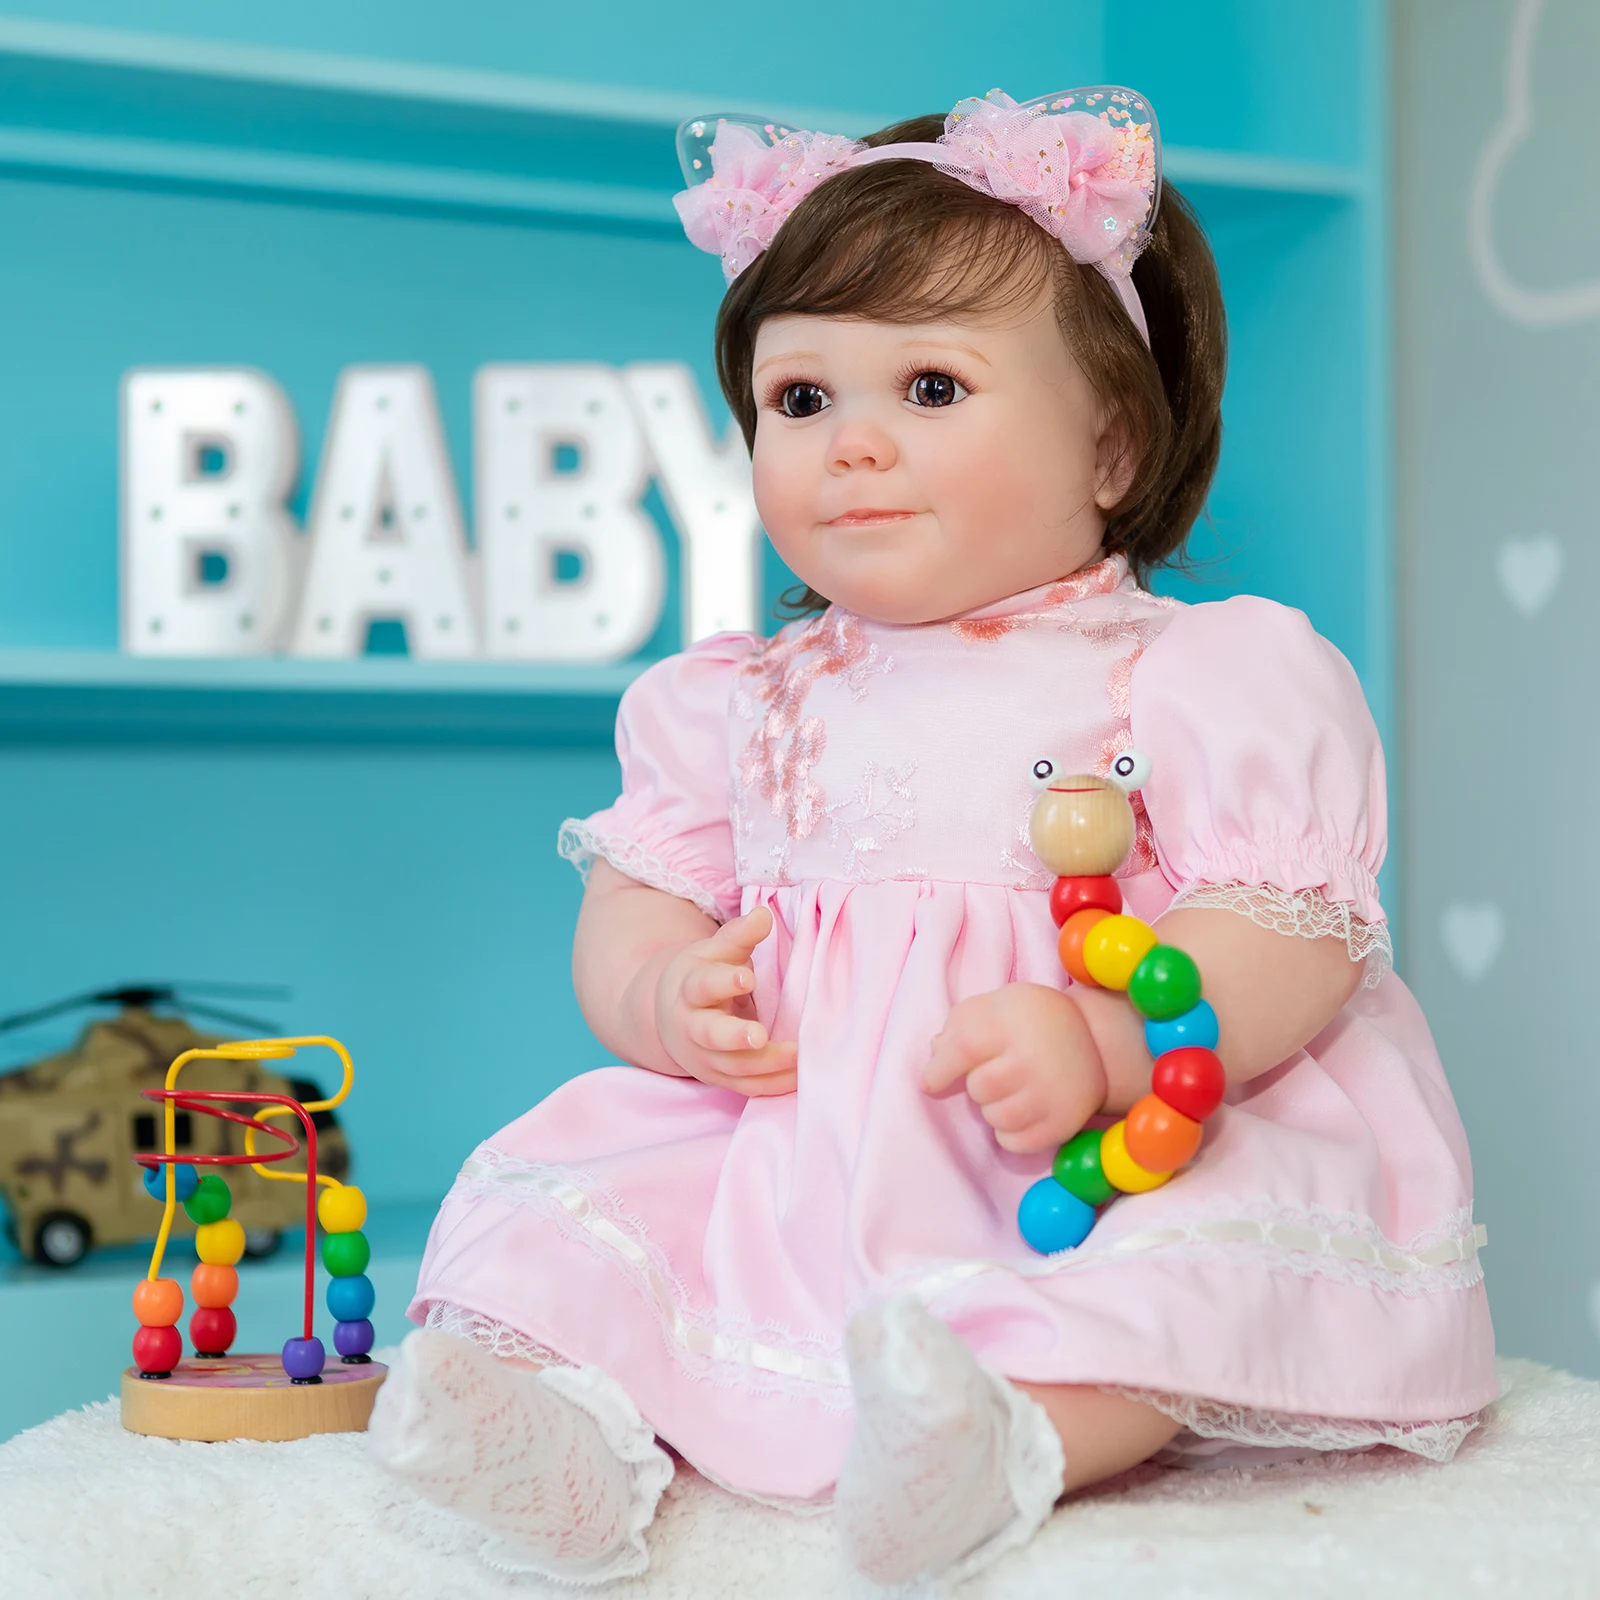 60 CM Lifelike Silicone Vinyl Doll Girl Baby Reborn Realistic Cute Babies Dolls With Lovely Pink Clothes Kids Playmate Birthday